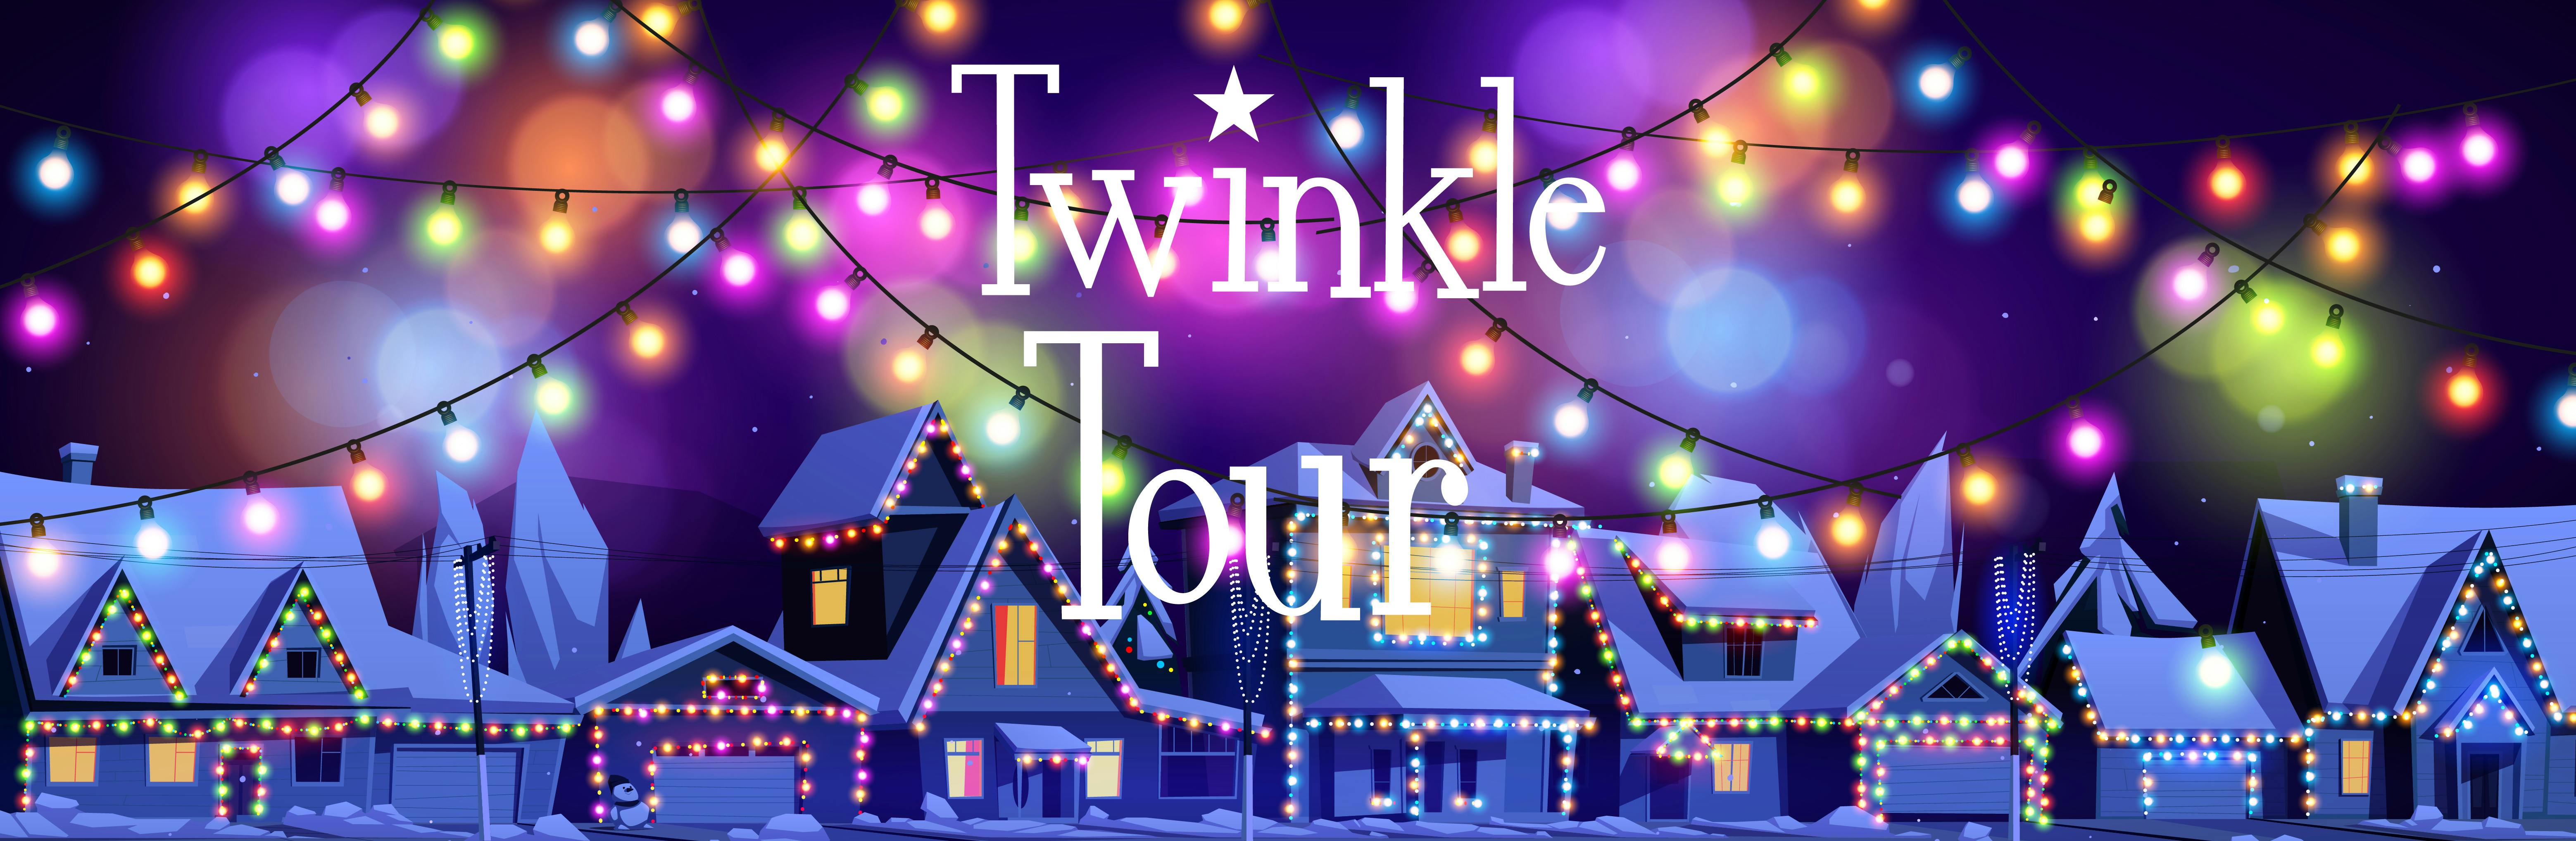 Twinkle Tour banner